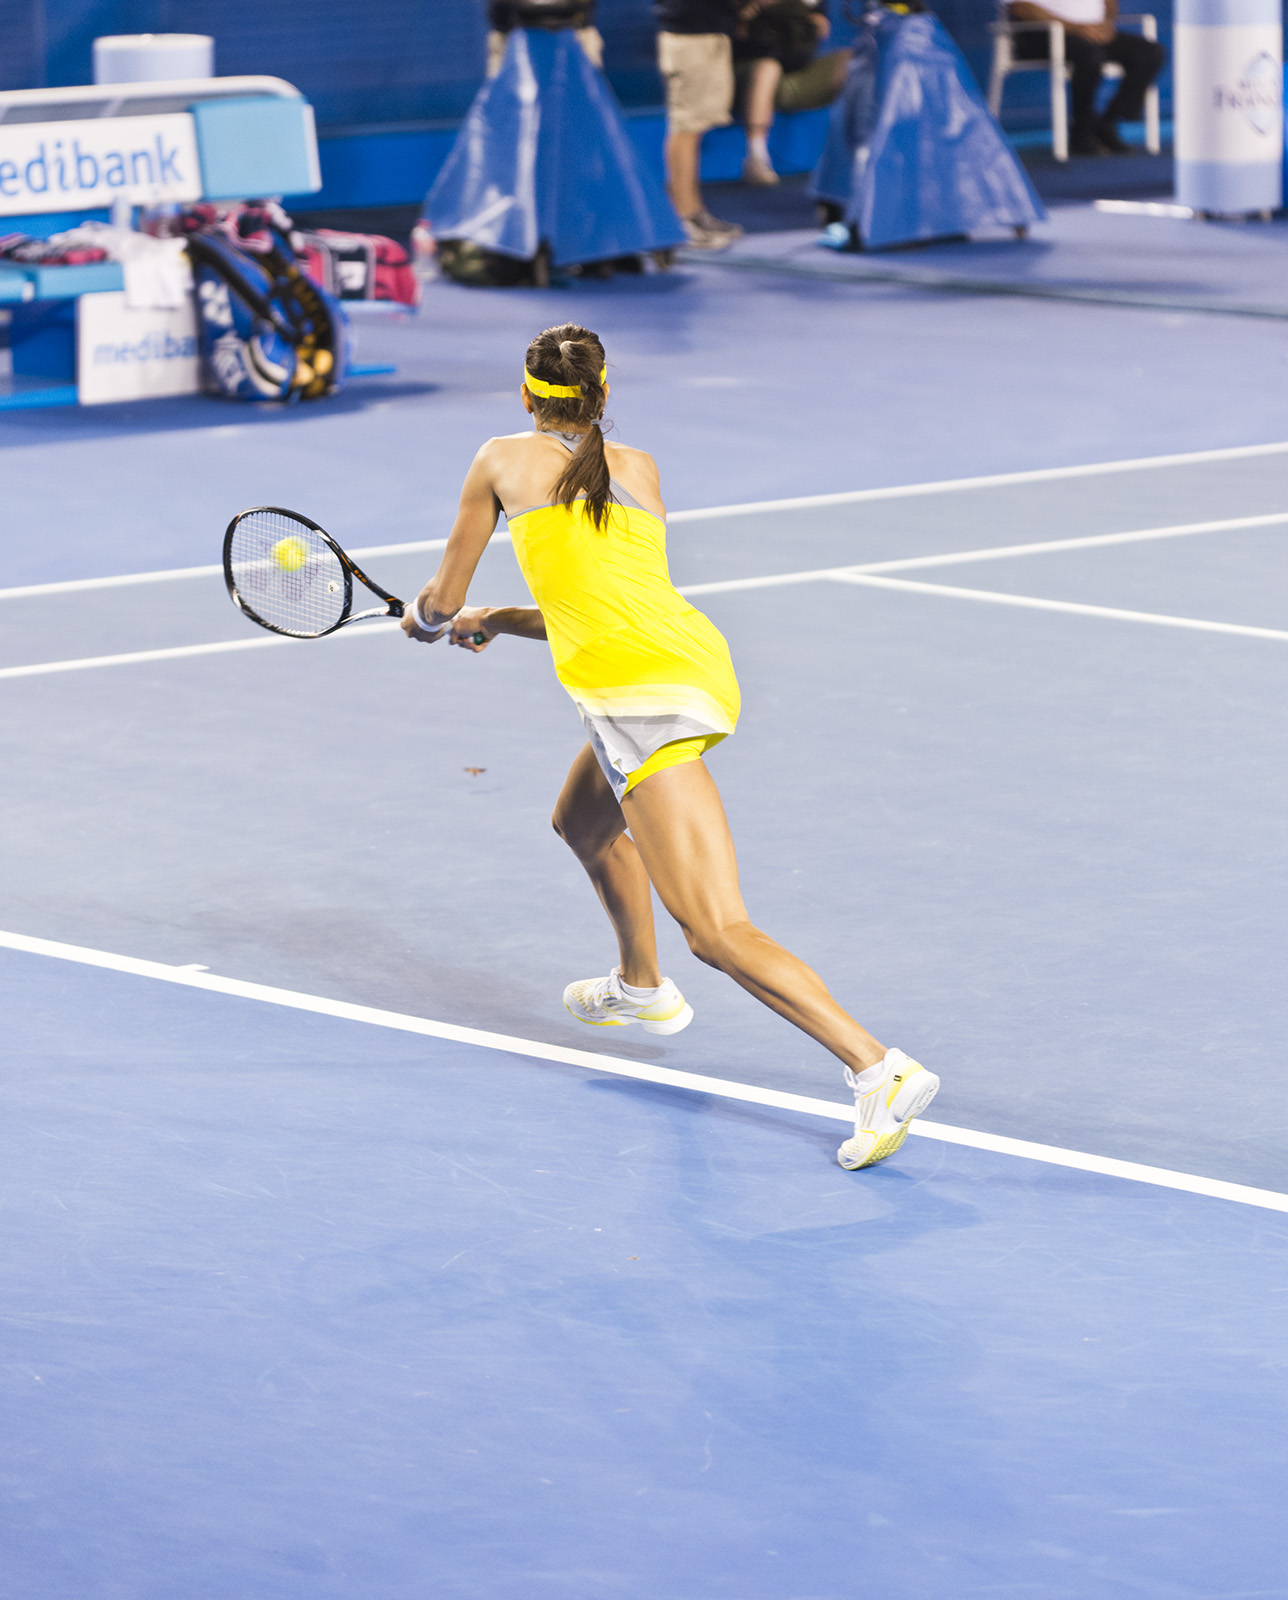 the woman is playing tennis on the court